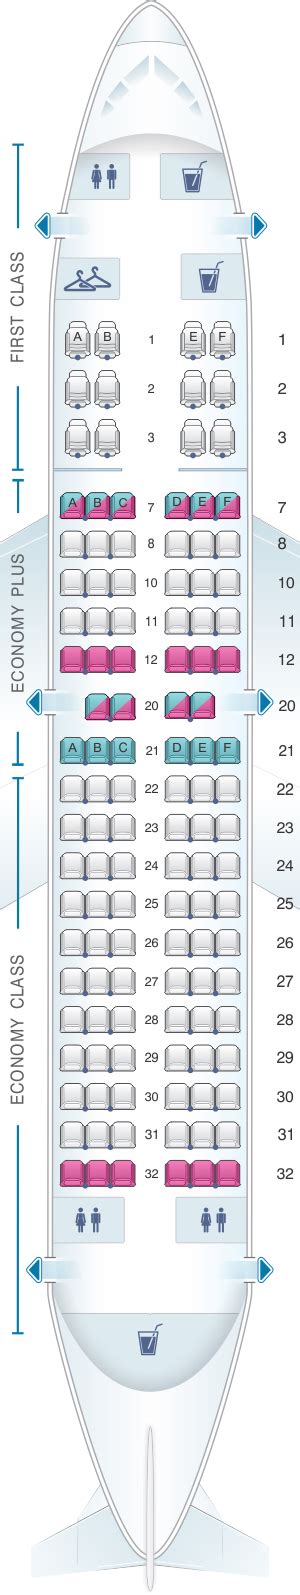 United 737 700 seat map. For your next United flight, use this seating chart to get the most comfortable seats, legroom, and recline on . ... Boeing 737-700 (737) Domestic Layout 1; Boeing 737-700 (737) Domestic Layout 2; ... This seat map reflects United's 767-400 international configuration, including 39 Polaris flat bed seats, 70 Economy Plus seats, and 133 Economy ... 